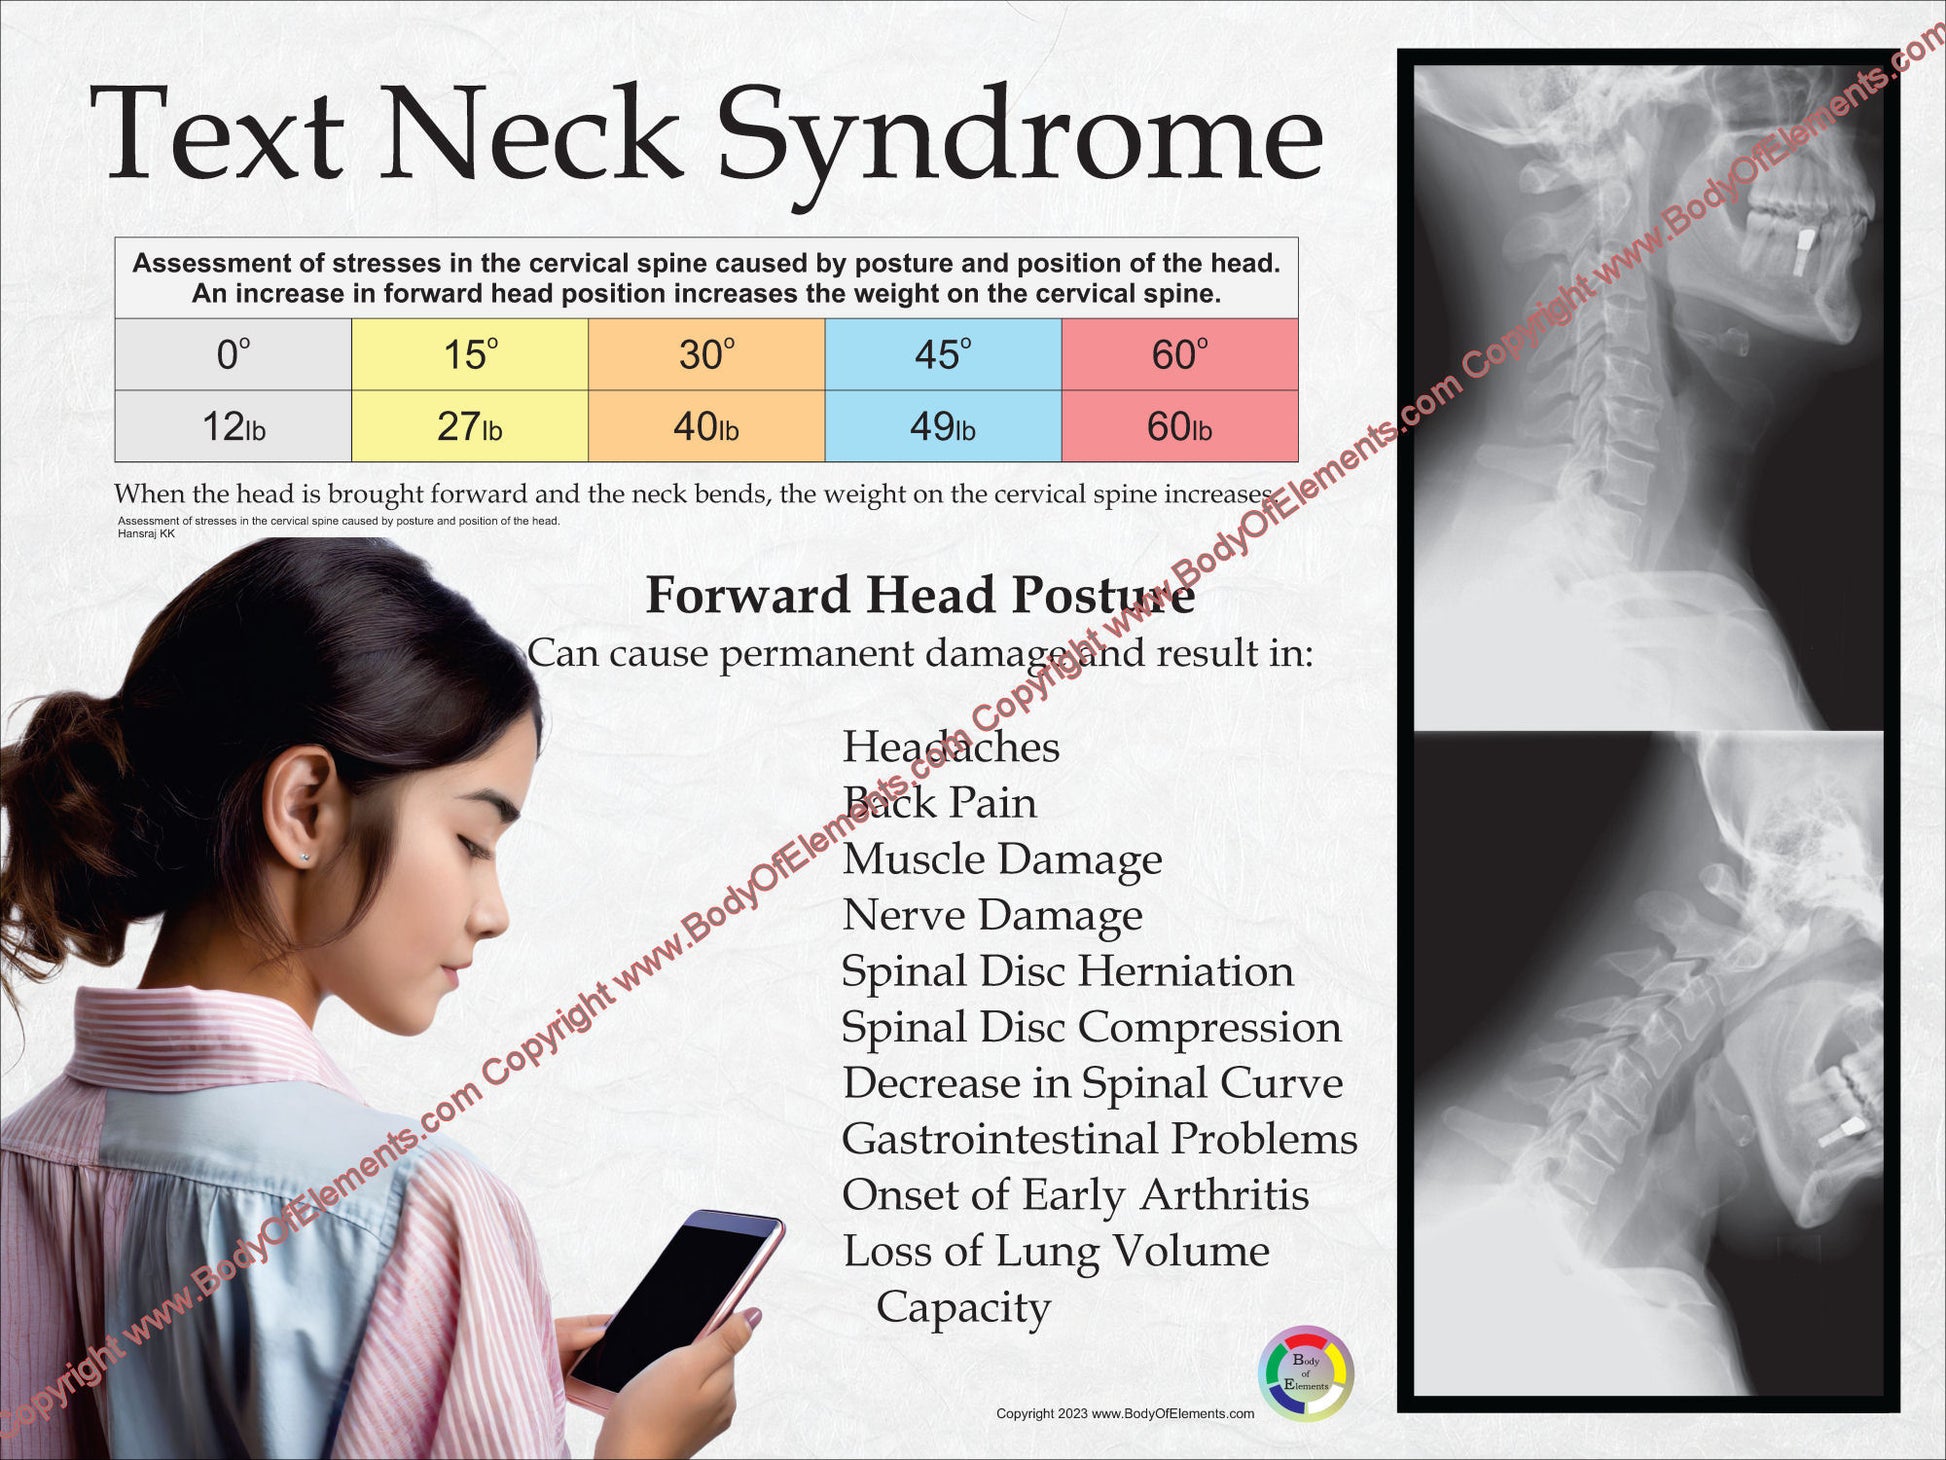 Young girl neck pain texting chart.